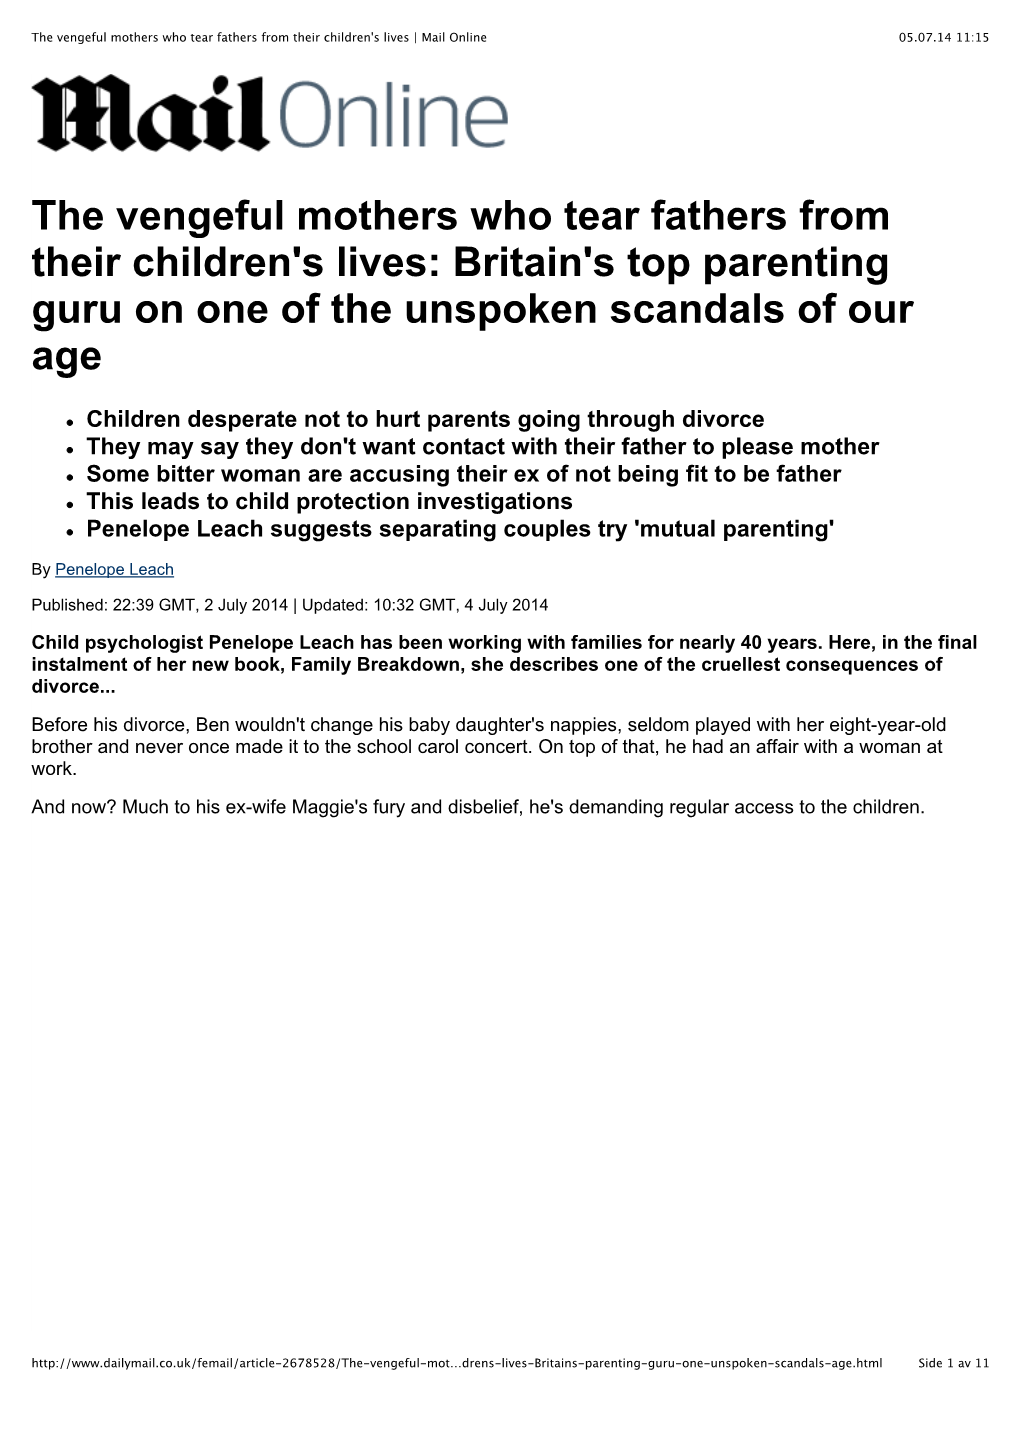 The Vengeful Mothers Who Tear Fathers from Their Children's Lives | Mail Online 05.07.14 11:15